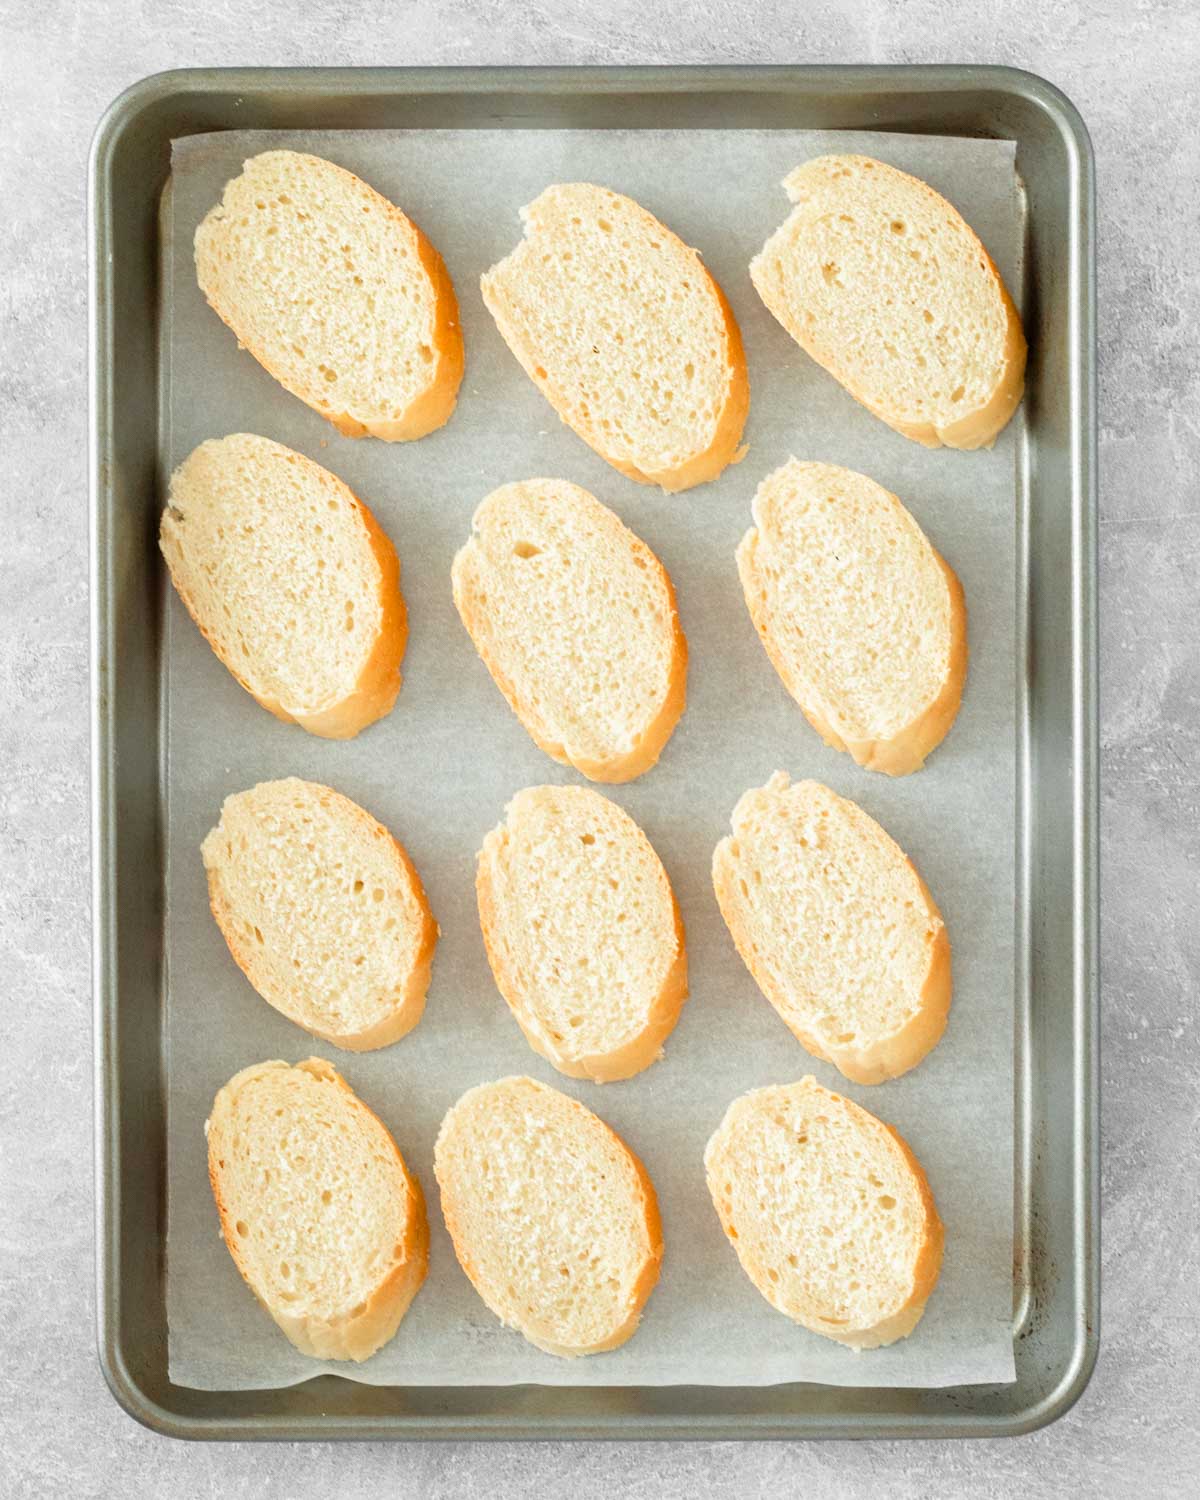 Step 3. Place the sliced bread on a sheet pan